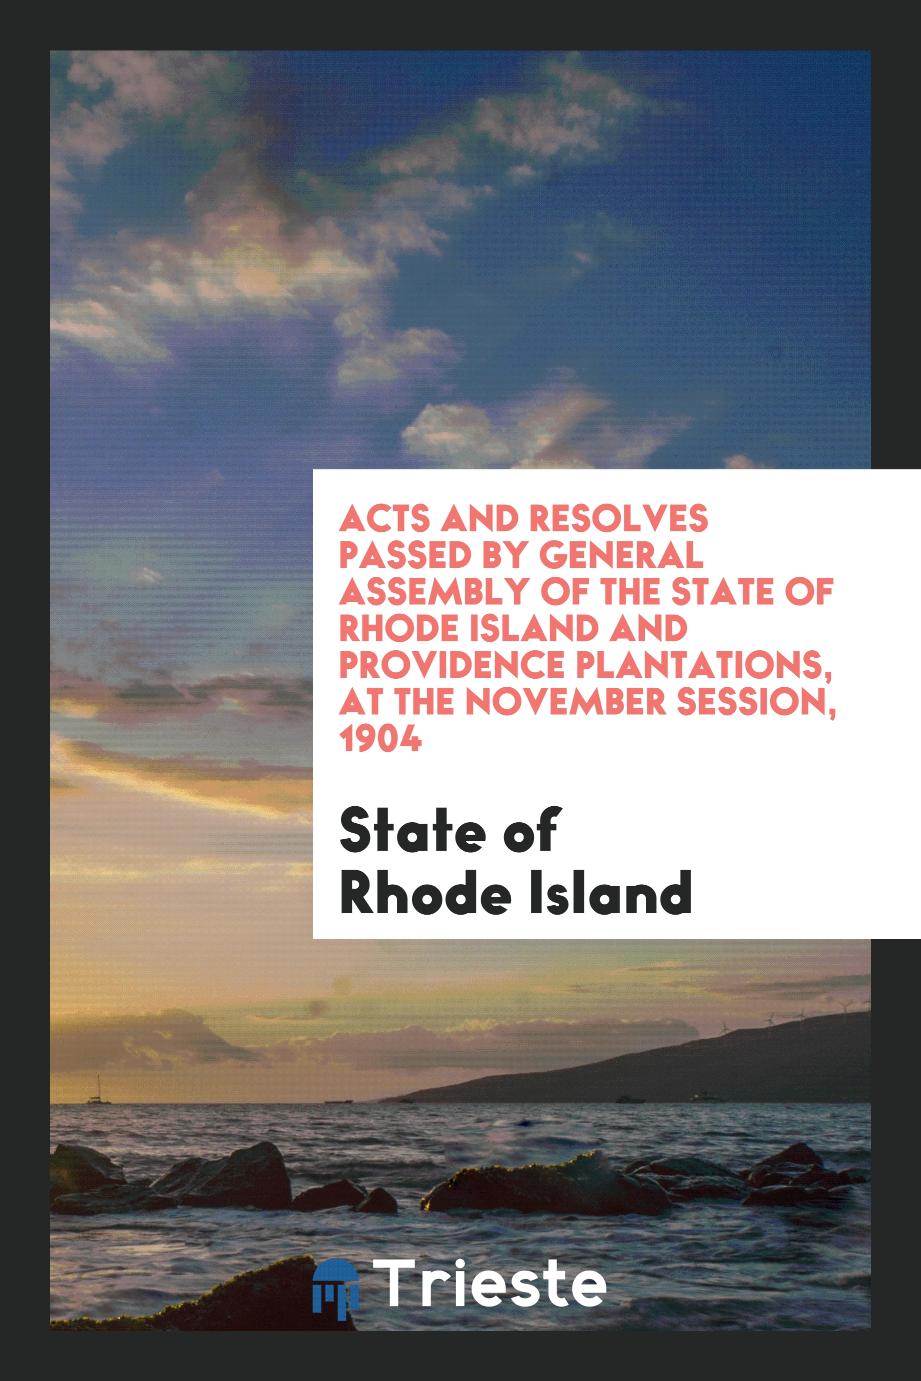 Acts and Resolves Passed by General Assembly of the State of Rhode Island and Providence Plantations, at the November Session, 1904